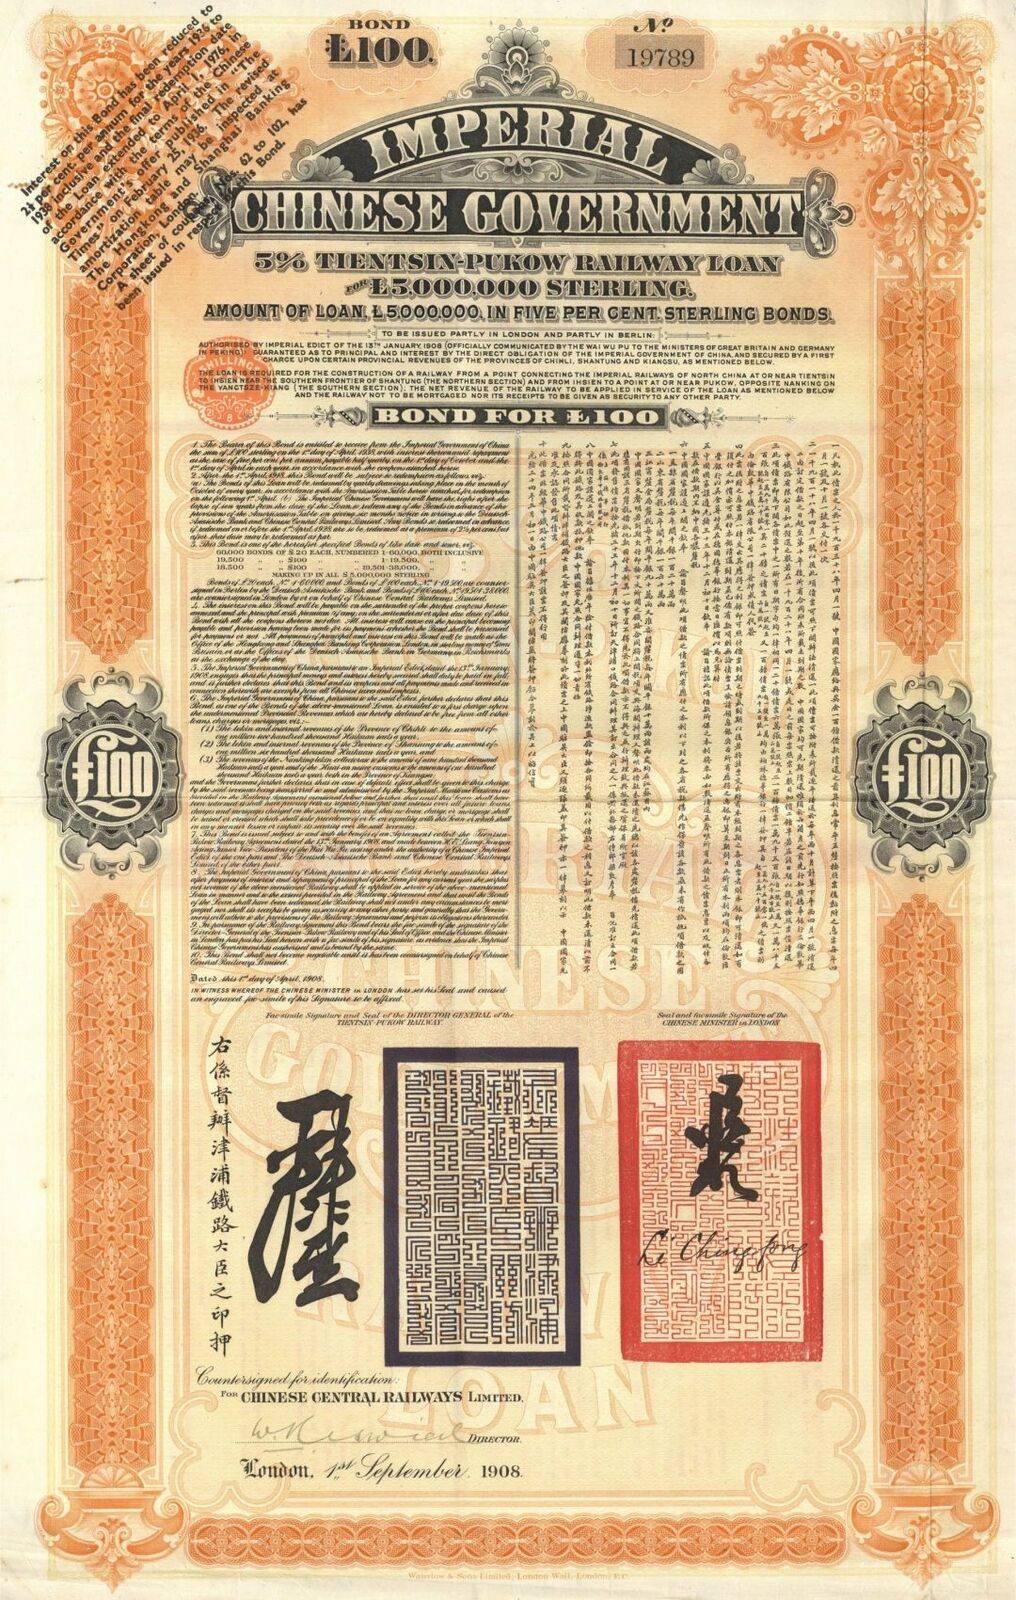 100 Imperial Chinese Government 5% Tientsin-Pukow Railway Loan 1908 Uncanceled G